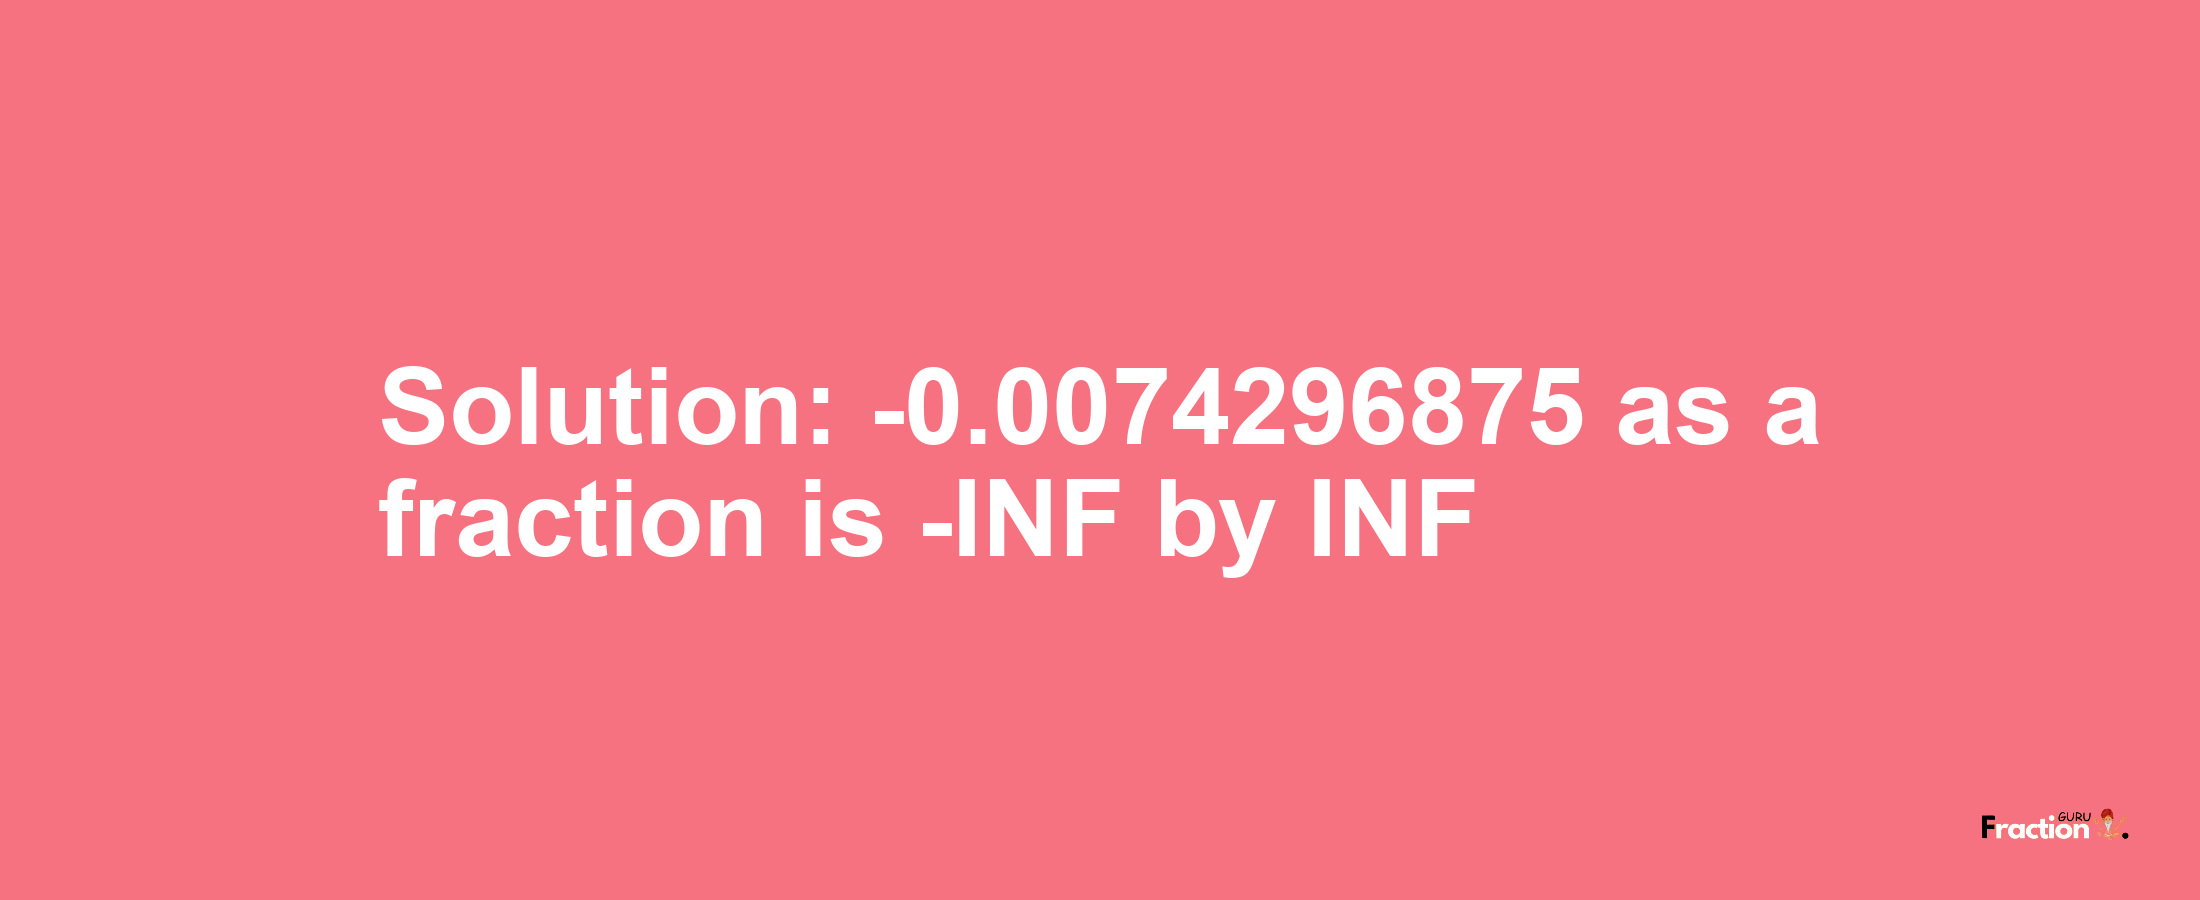 Solution:-0.0074296875 as a fraction is -INF/INF